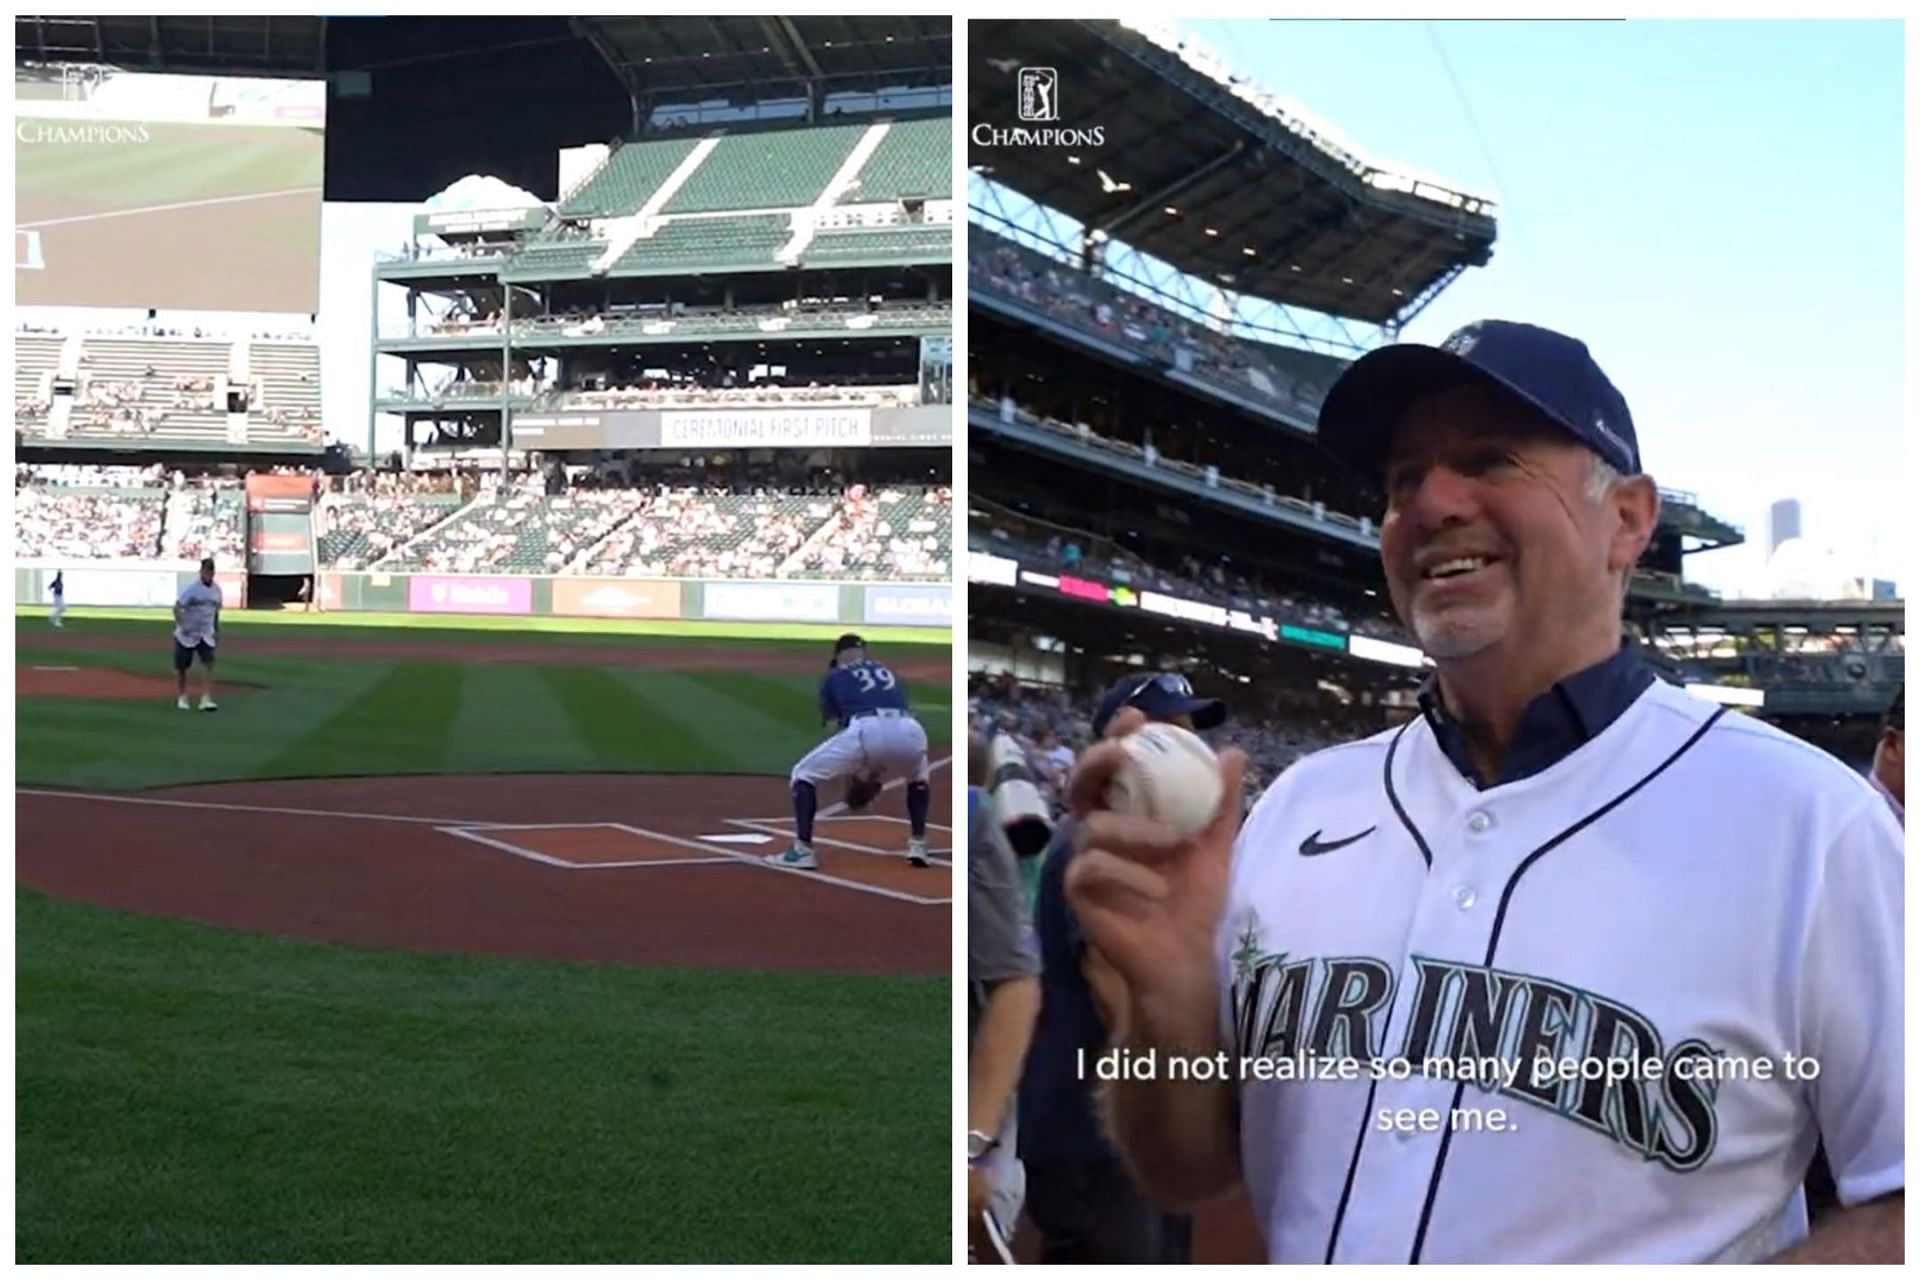 Rod Pampling throws the first pitch at the Seattle Mariners game against the San Diego Padres( Image via Twitter.com/ChampionsTour)